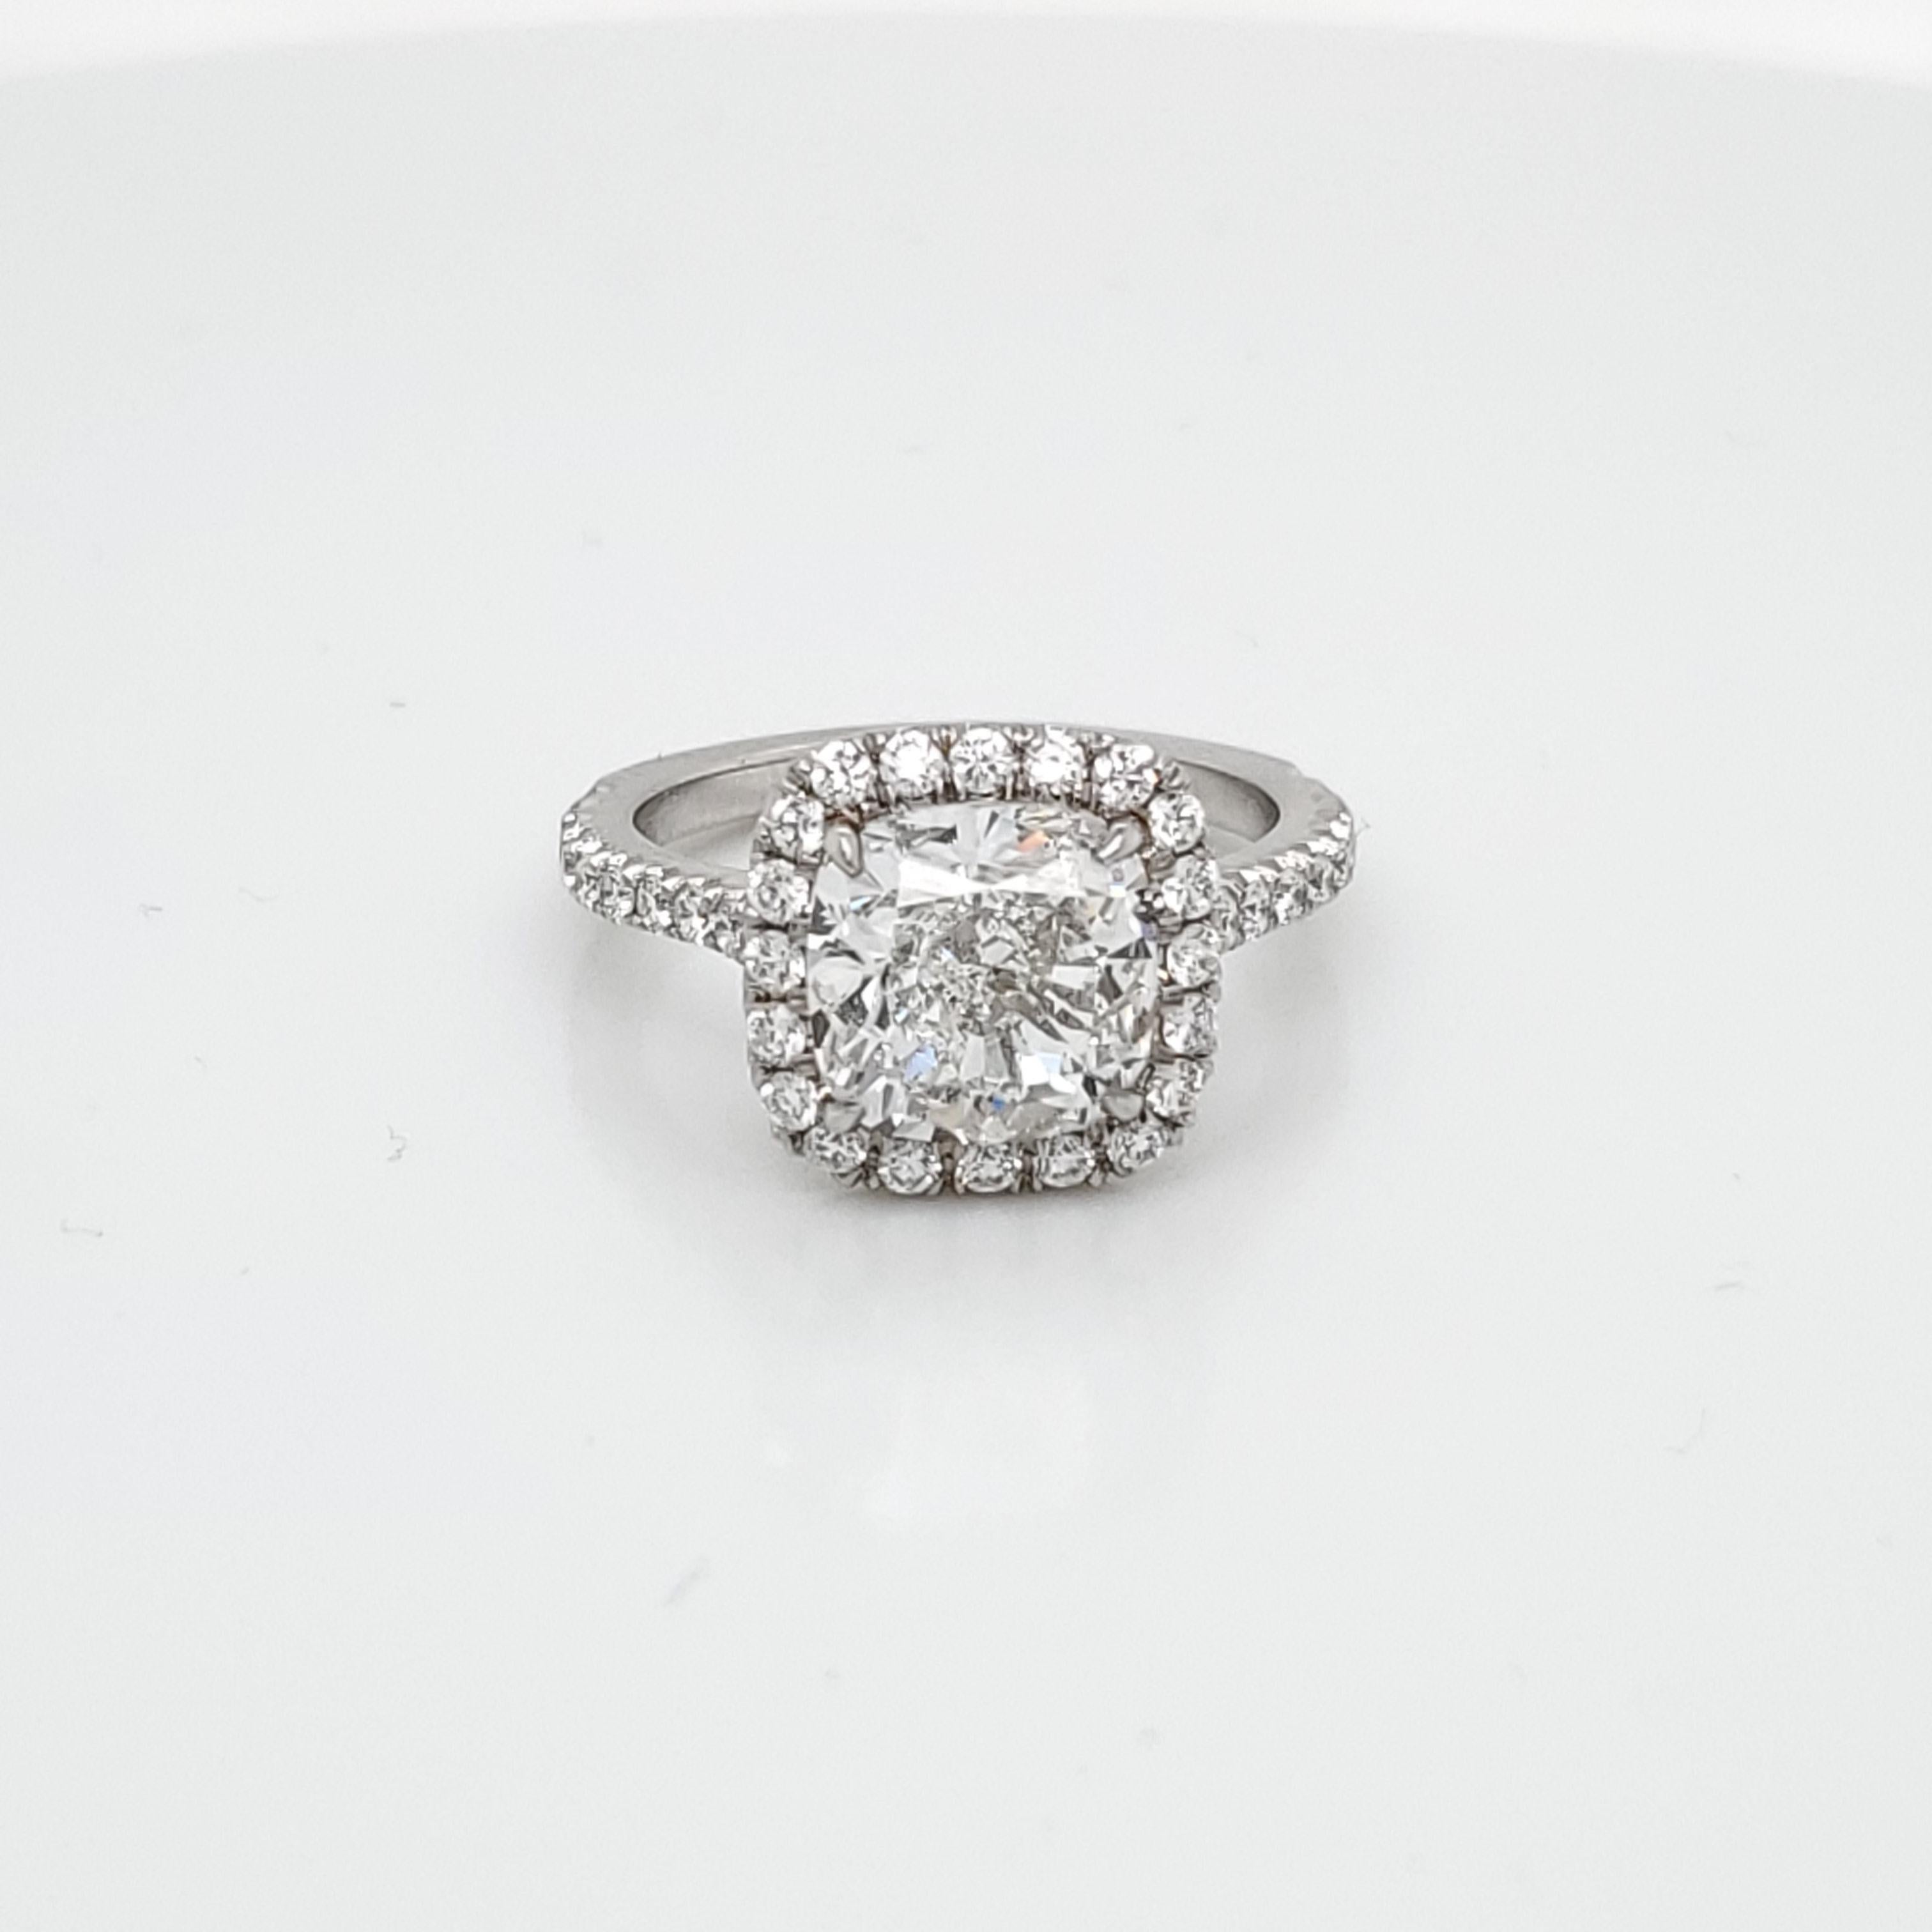 GIA Certified 3.41 Cushion Cut Diamond in Halo and Pave setting. The Center Cushion Diamond is graded F VVS2 and the Diamonds on the setting are VS in quality. There is a total of 0.54 carats on the settings. 